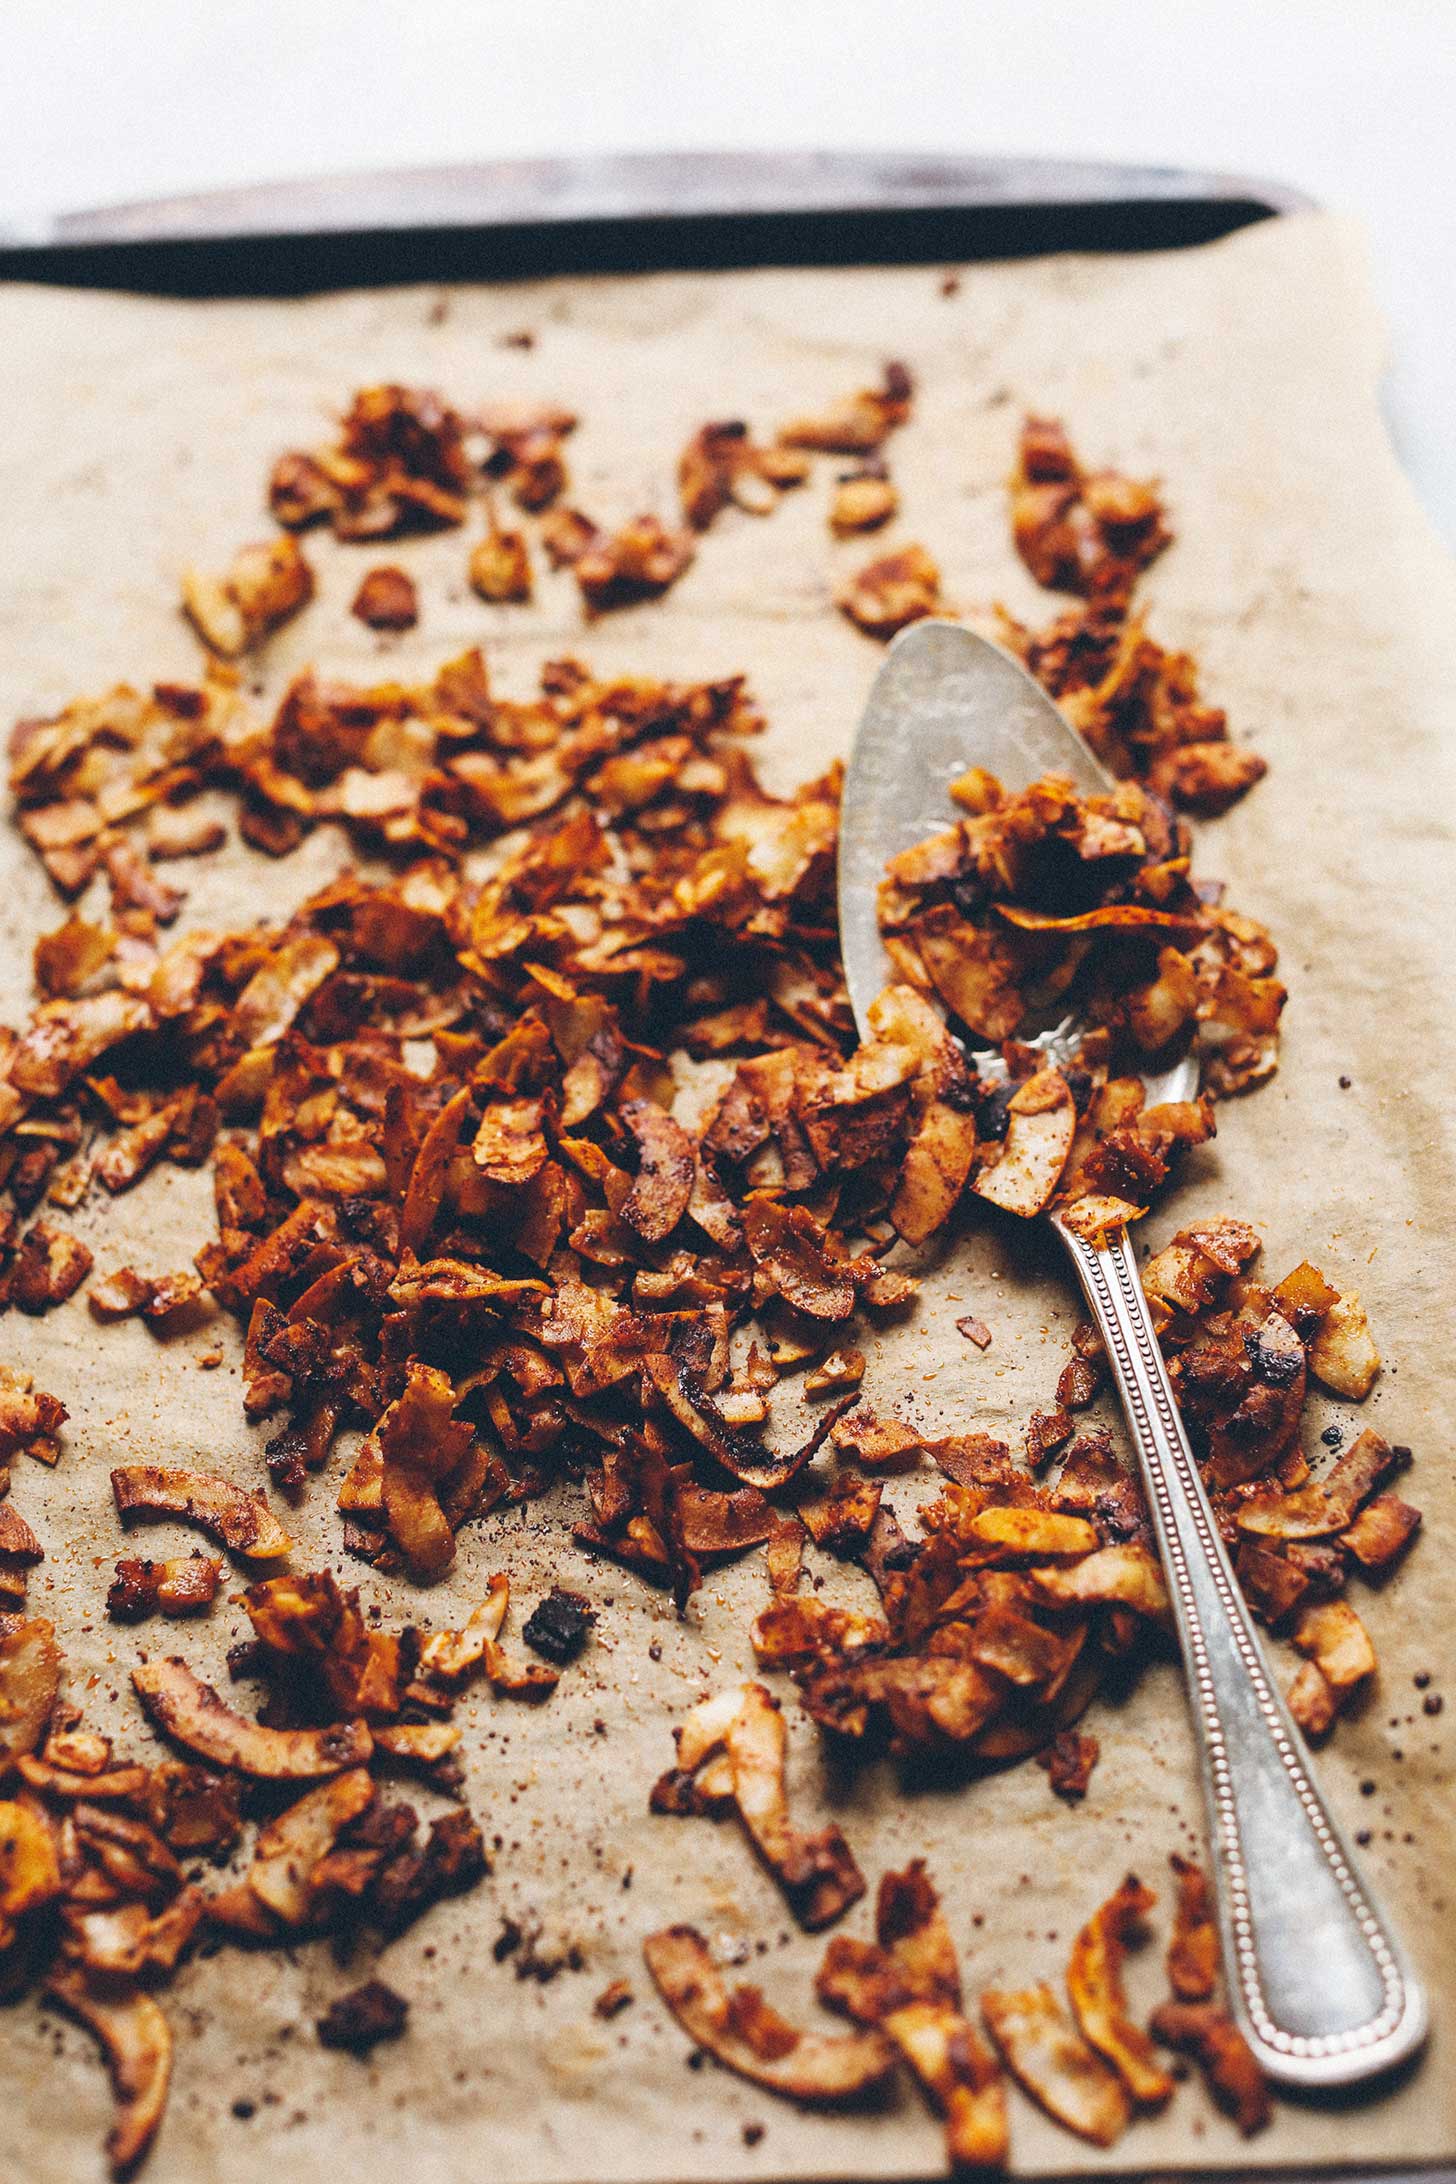 Baking sheet of homemade Vegan Coconut Bacon and a serving spoon